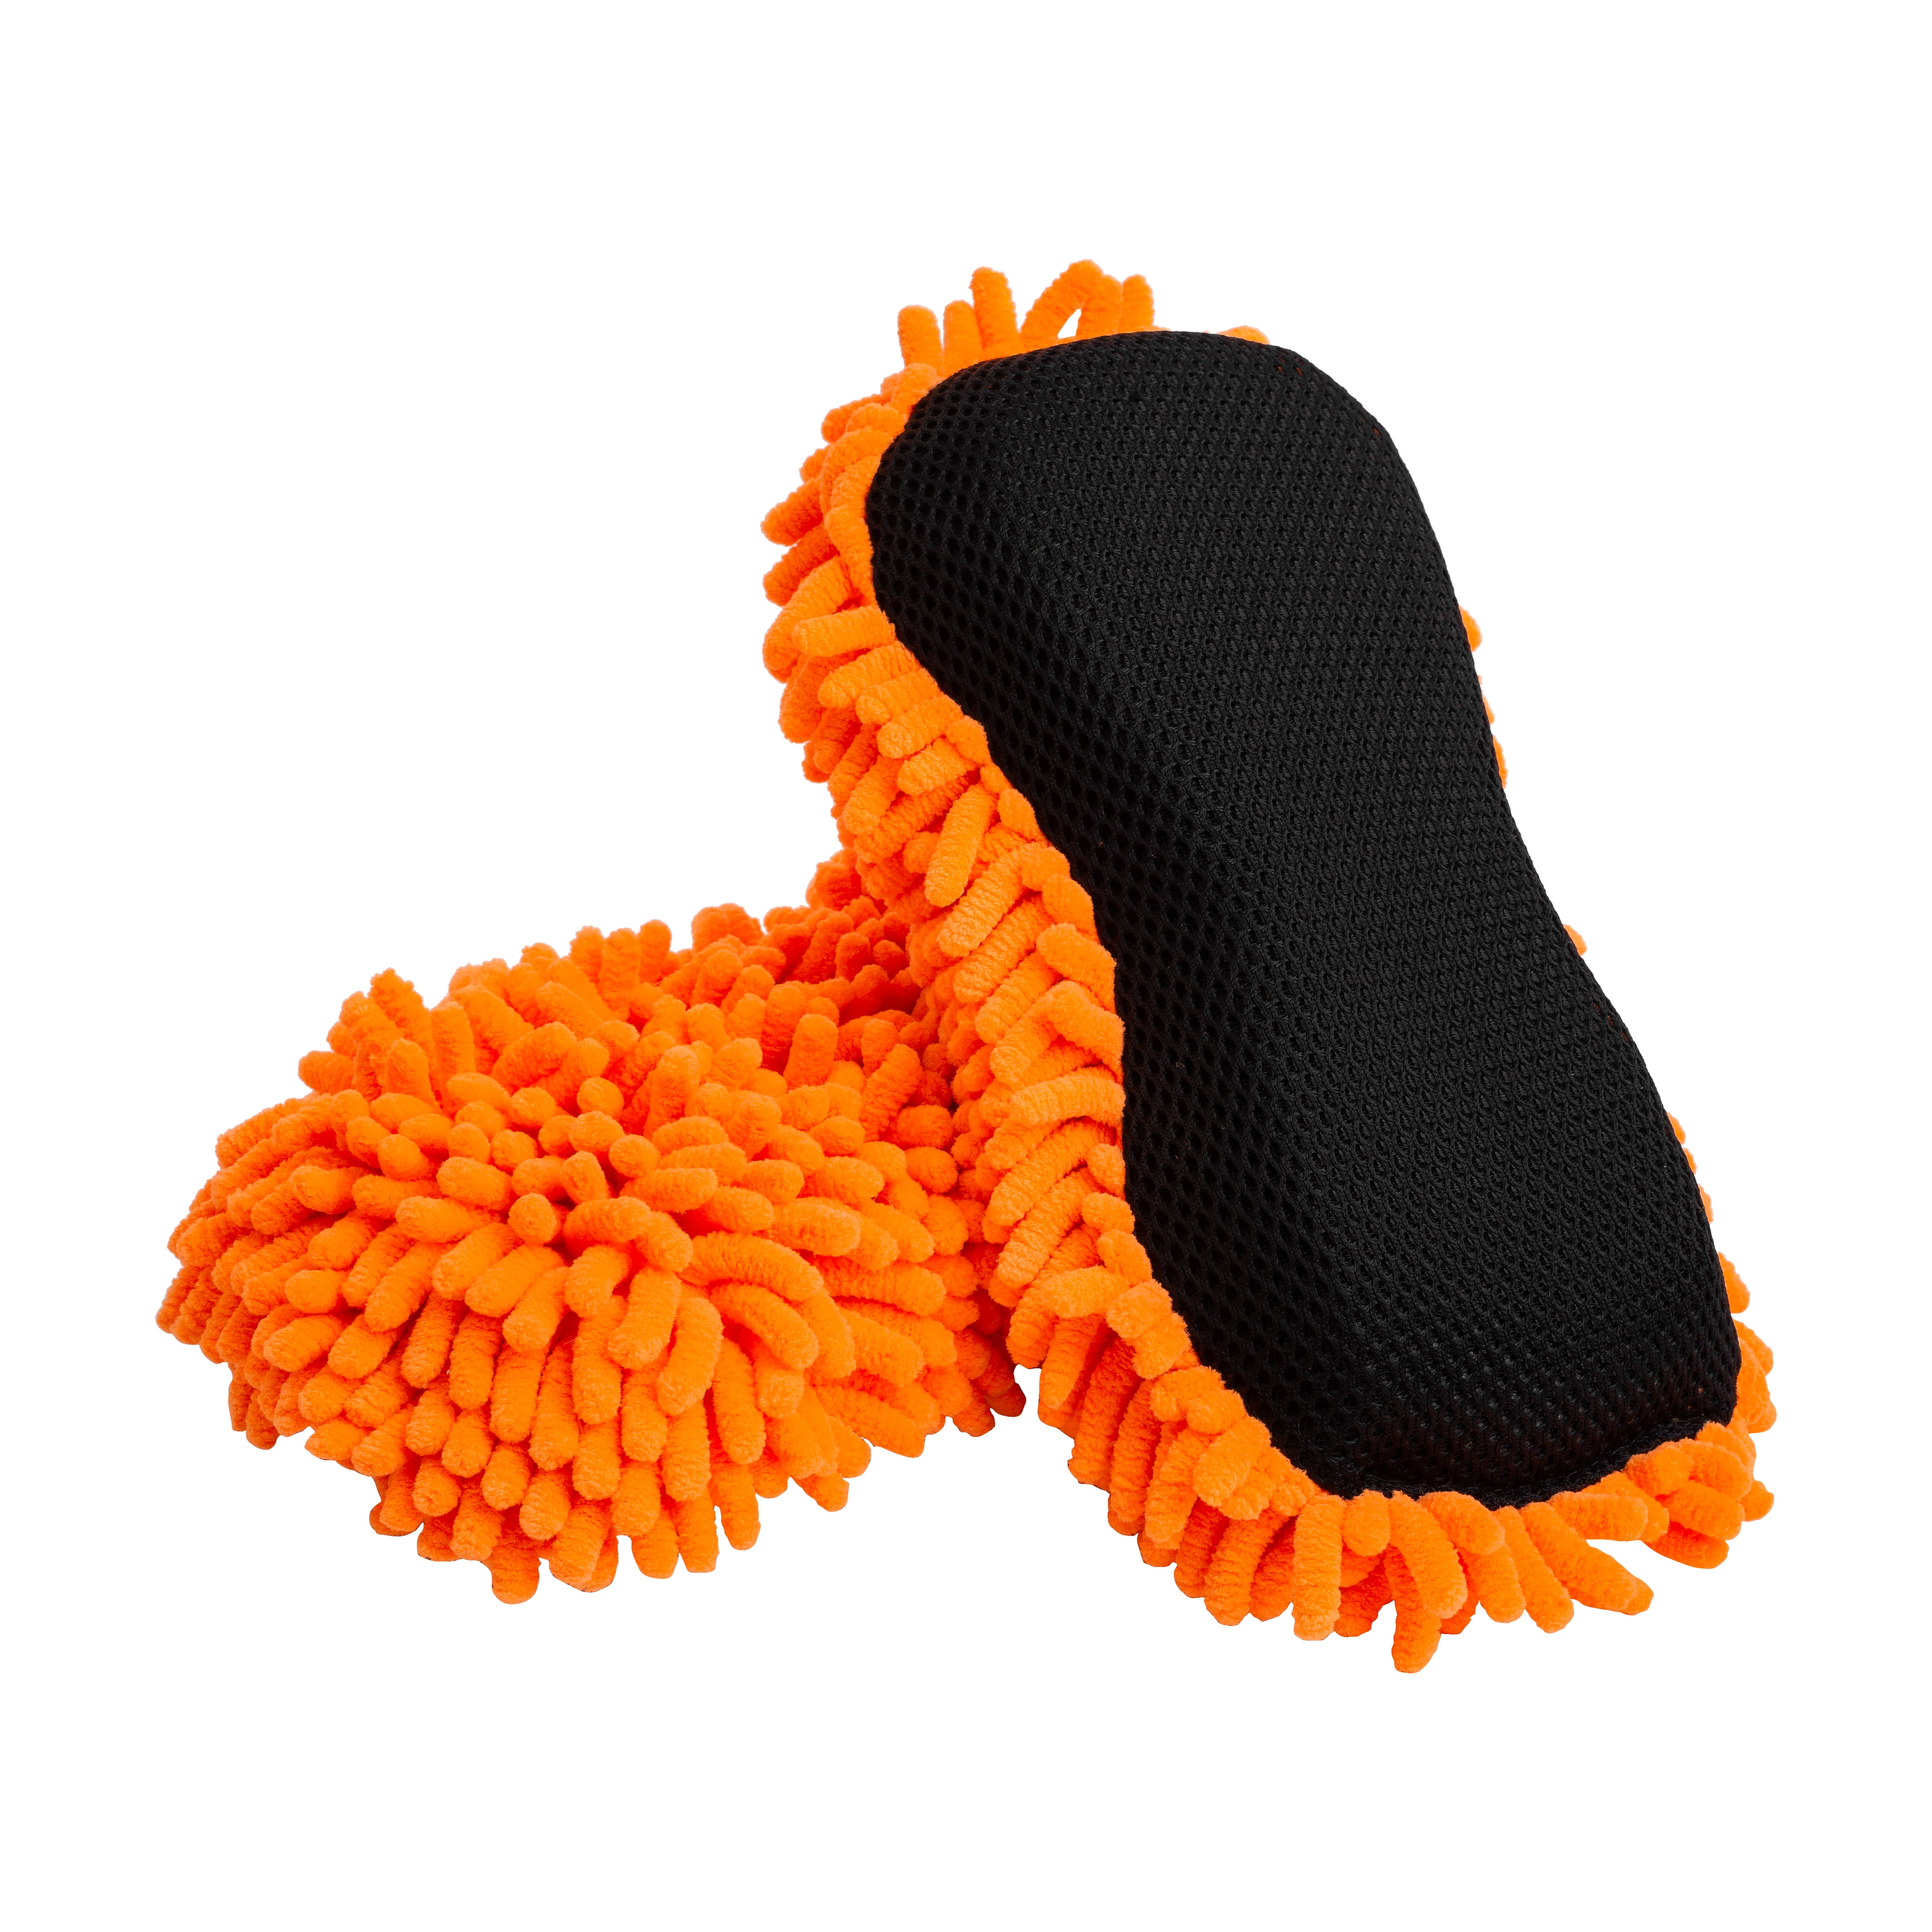 AutoShow Soft Grip Sponge - Non-Scratch Car Wash Sponge - Multiple Colors -  Estracell-S Material - Highly Durable - Soapy Water Flooding